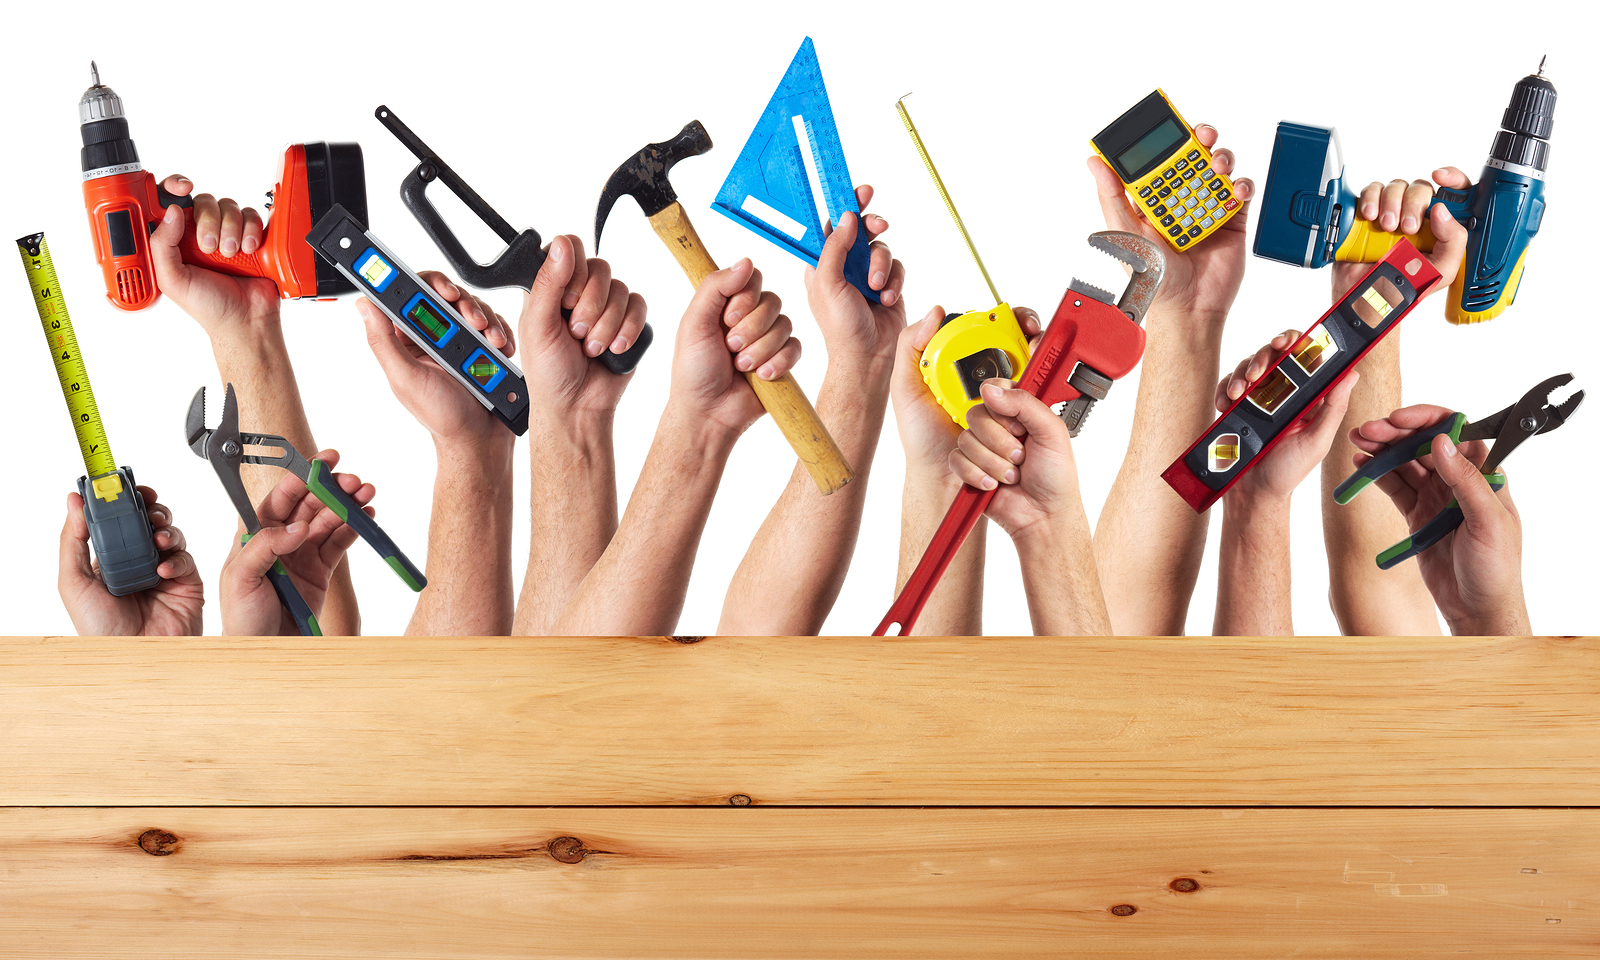 DIY tools set collage. Isolated on white background.